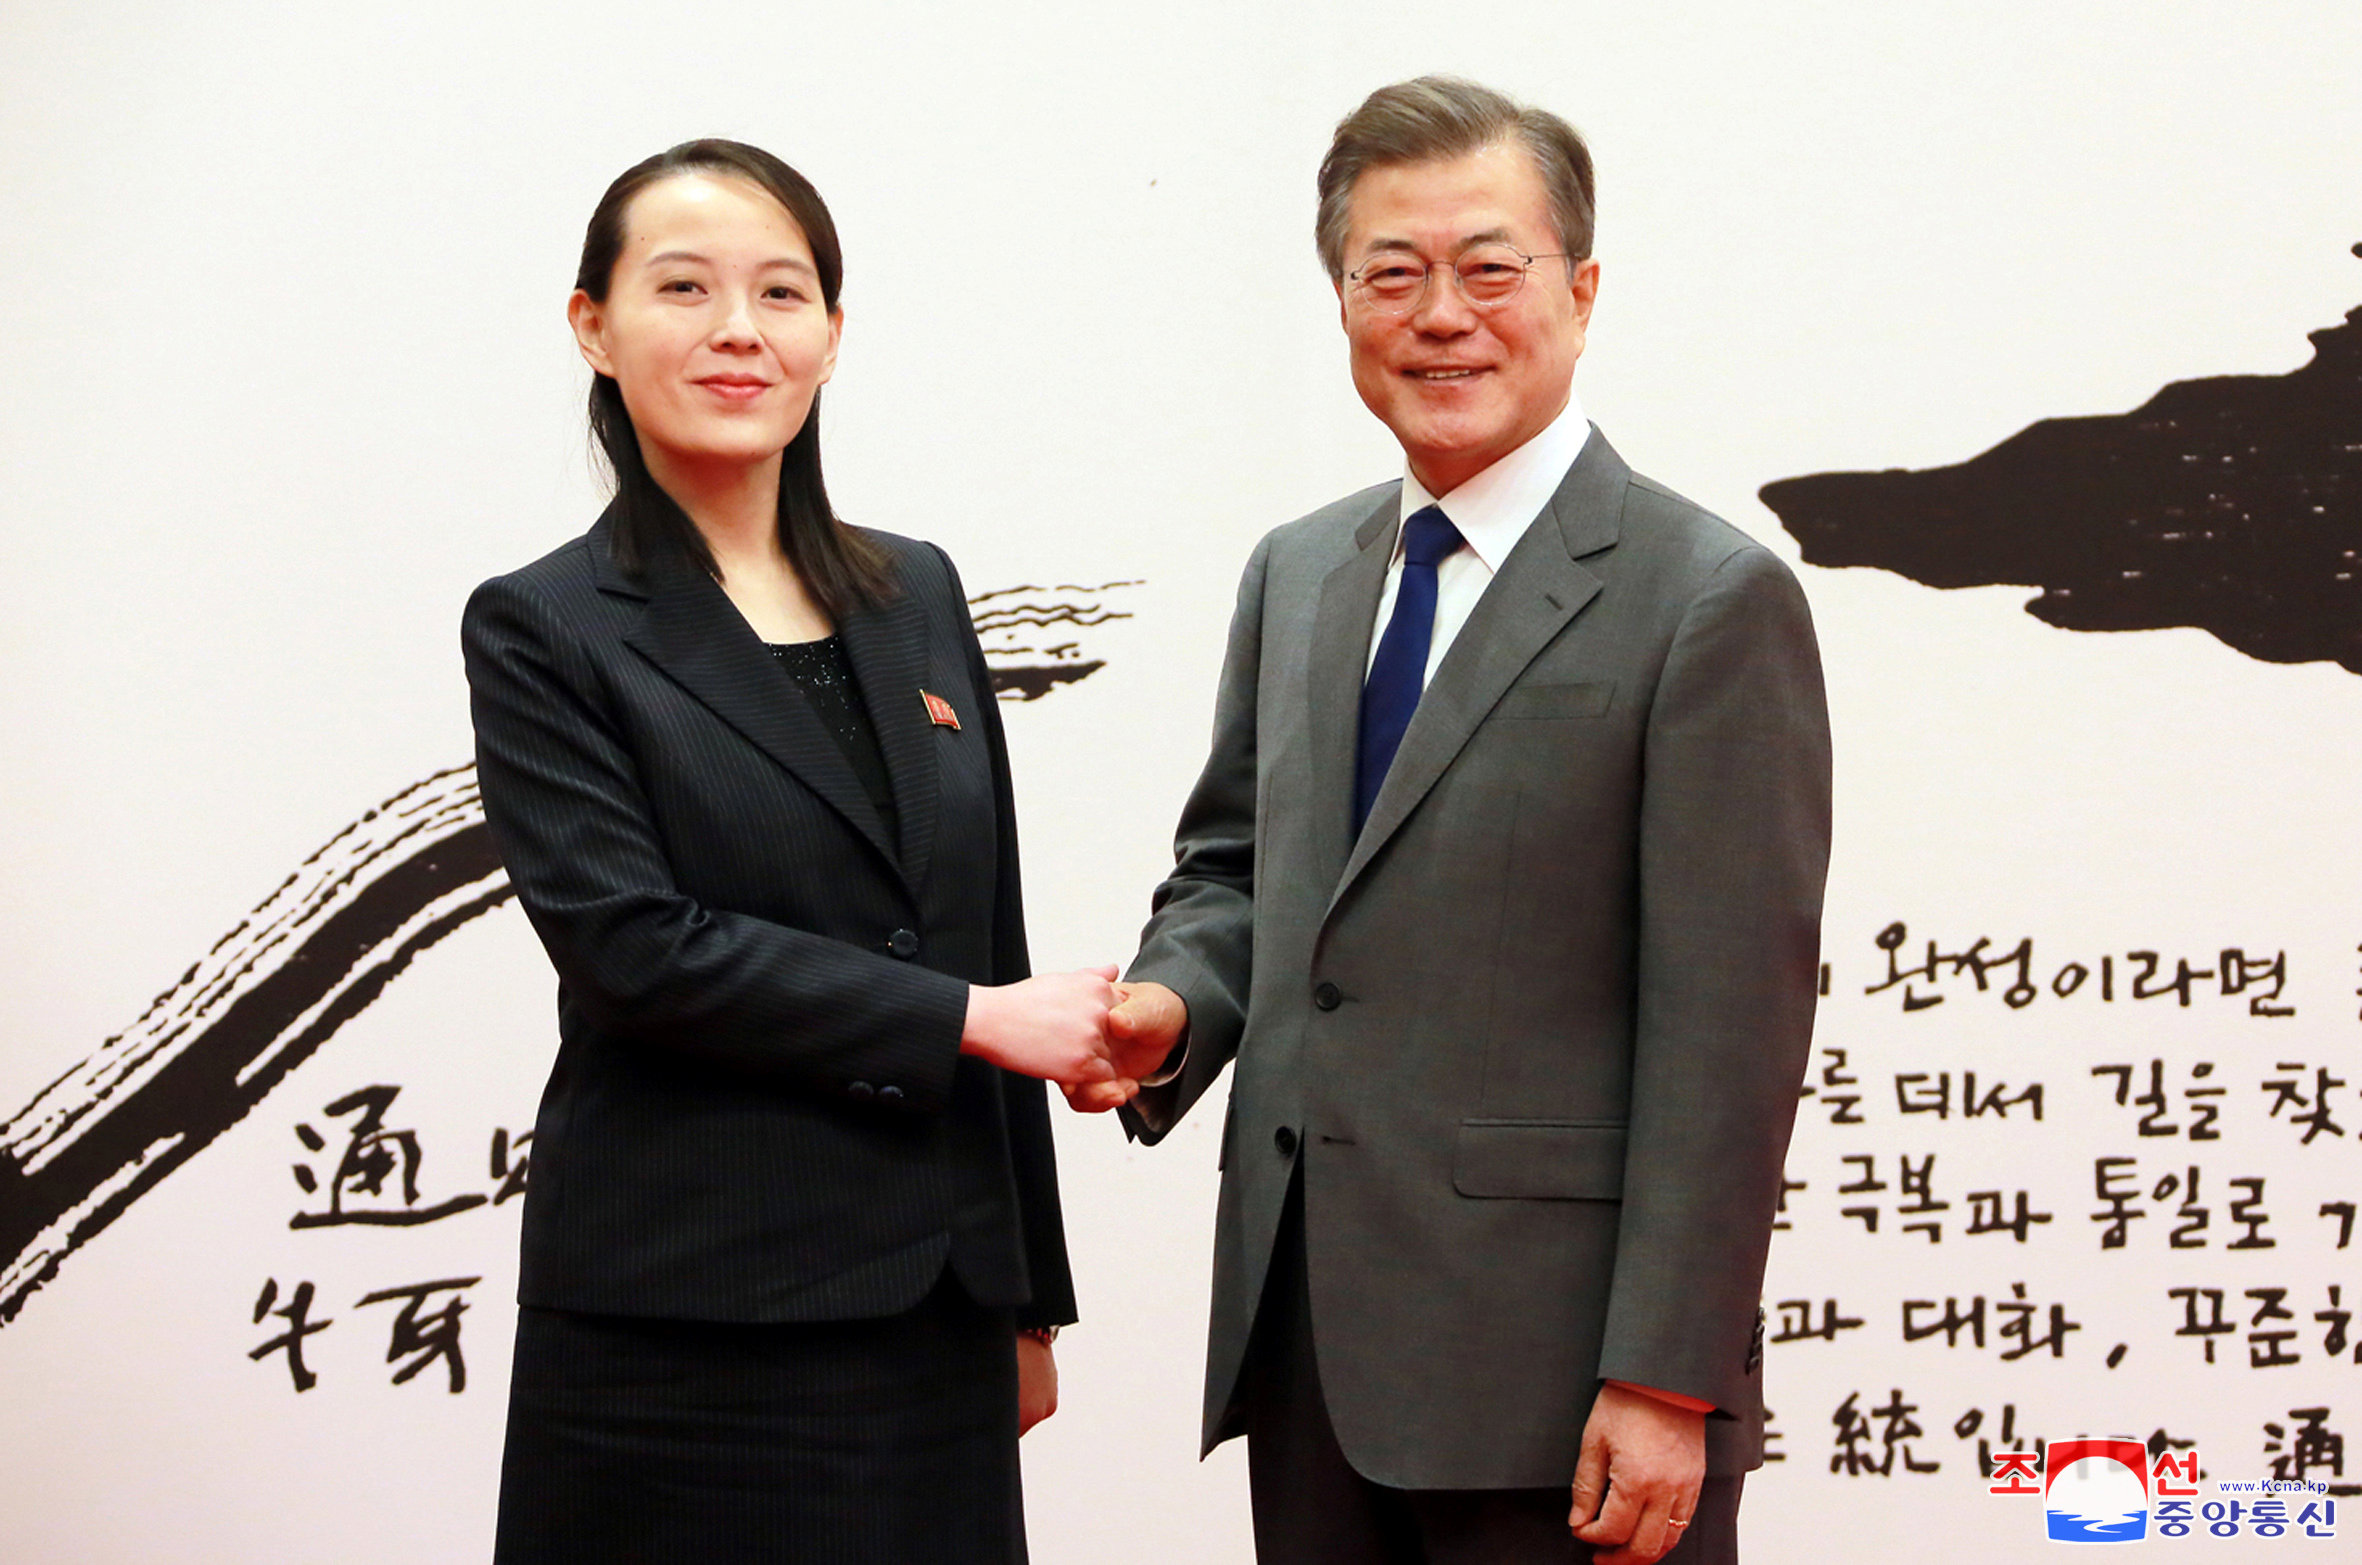 South Korean President Moon Jae-in shakes hands with Kim Yo Jong, the sister of North Korea's leader Kim Jong Un, in Seoul, South Korea in this undated photo released by North Korea's Korean Central News Agency (KCNA) February 10, 2018.